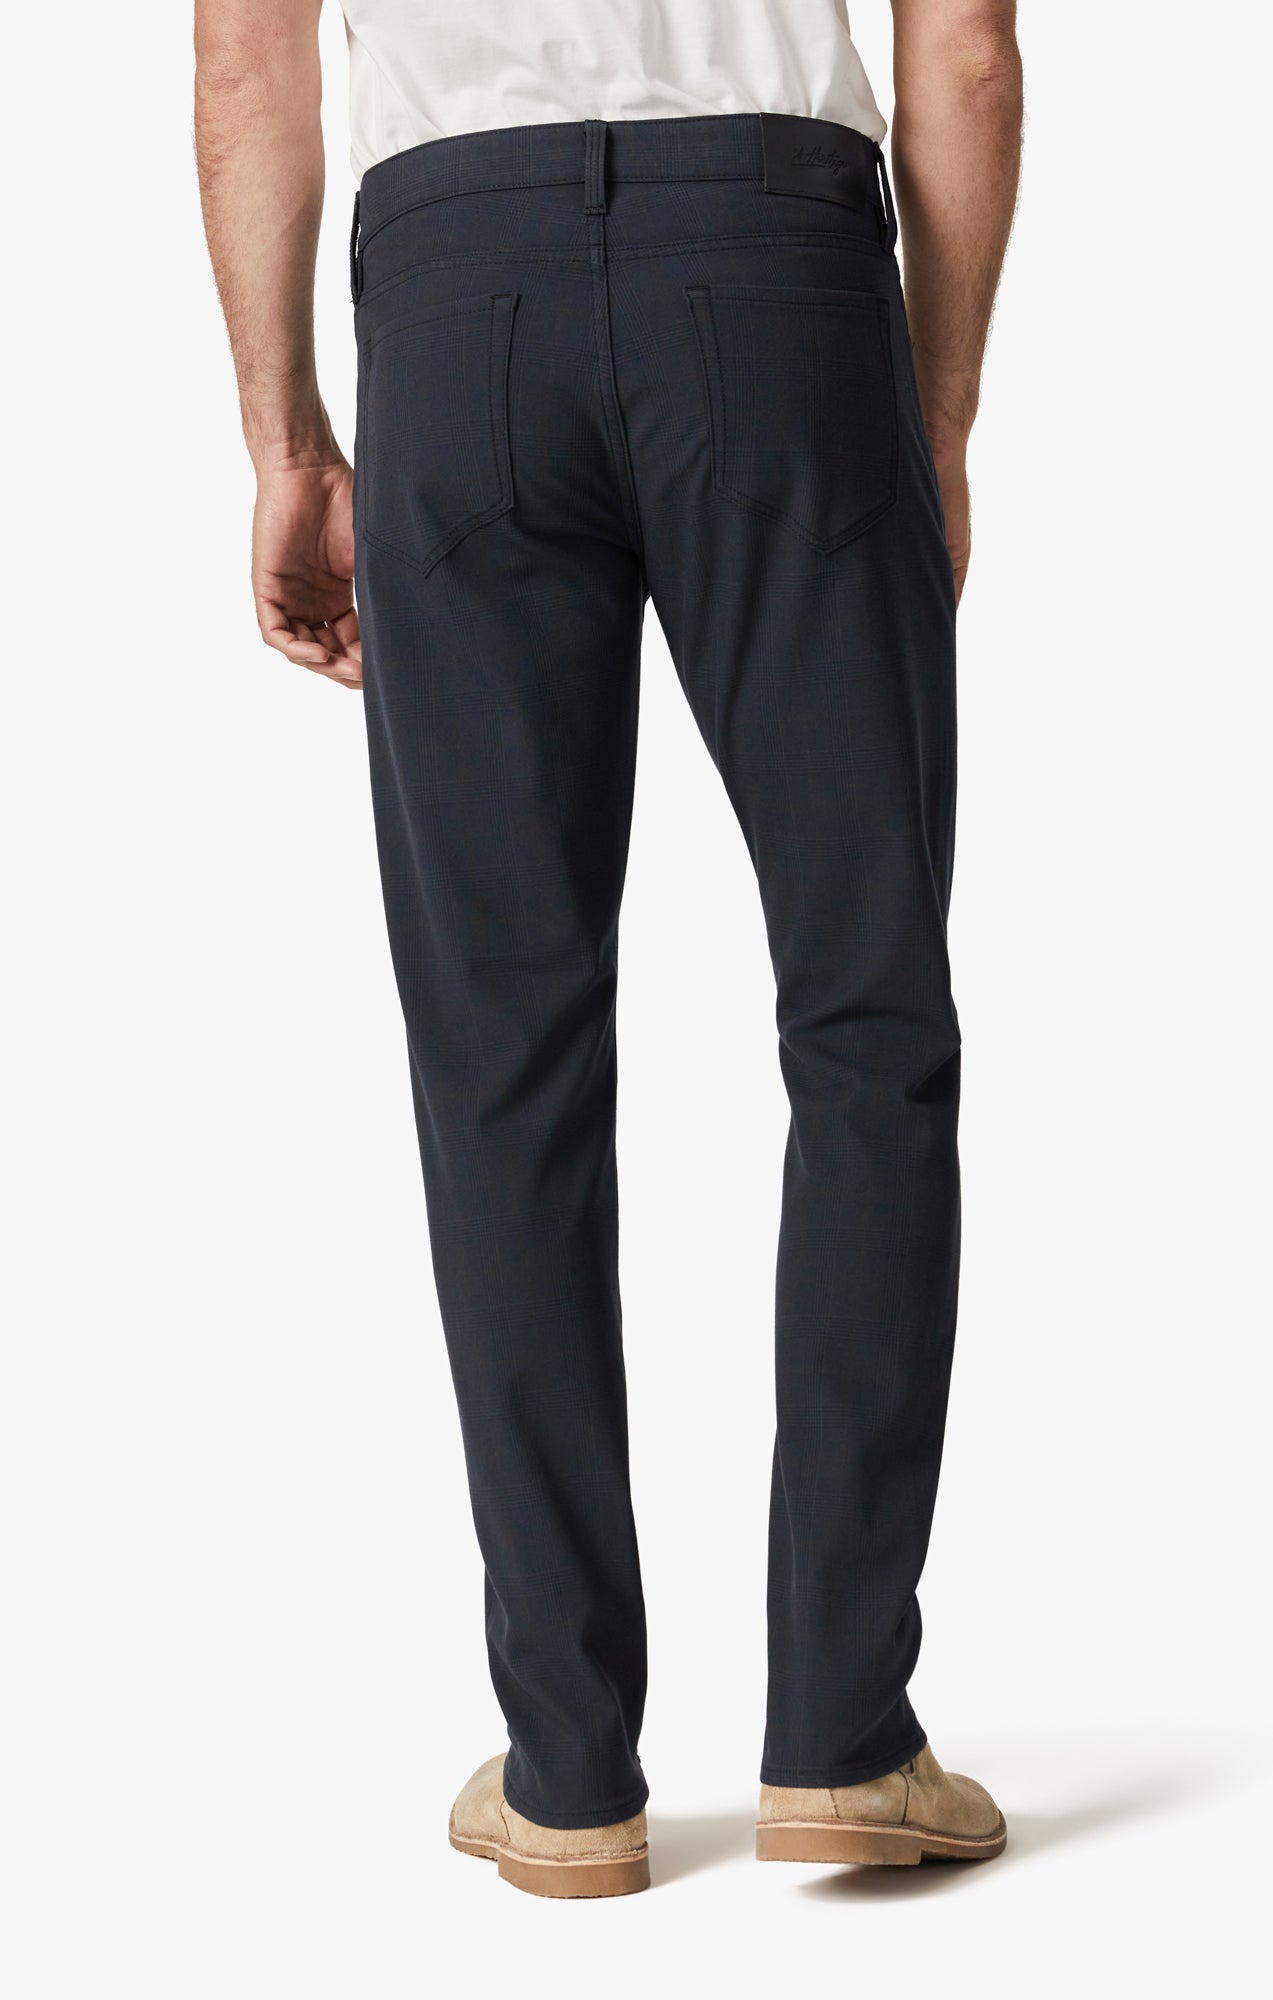 Cool Tapered Leg Pants In Navy Elite Check Image 4